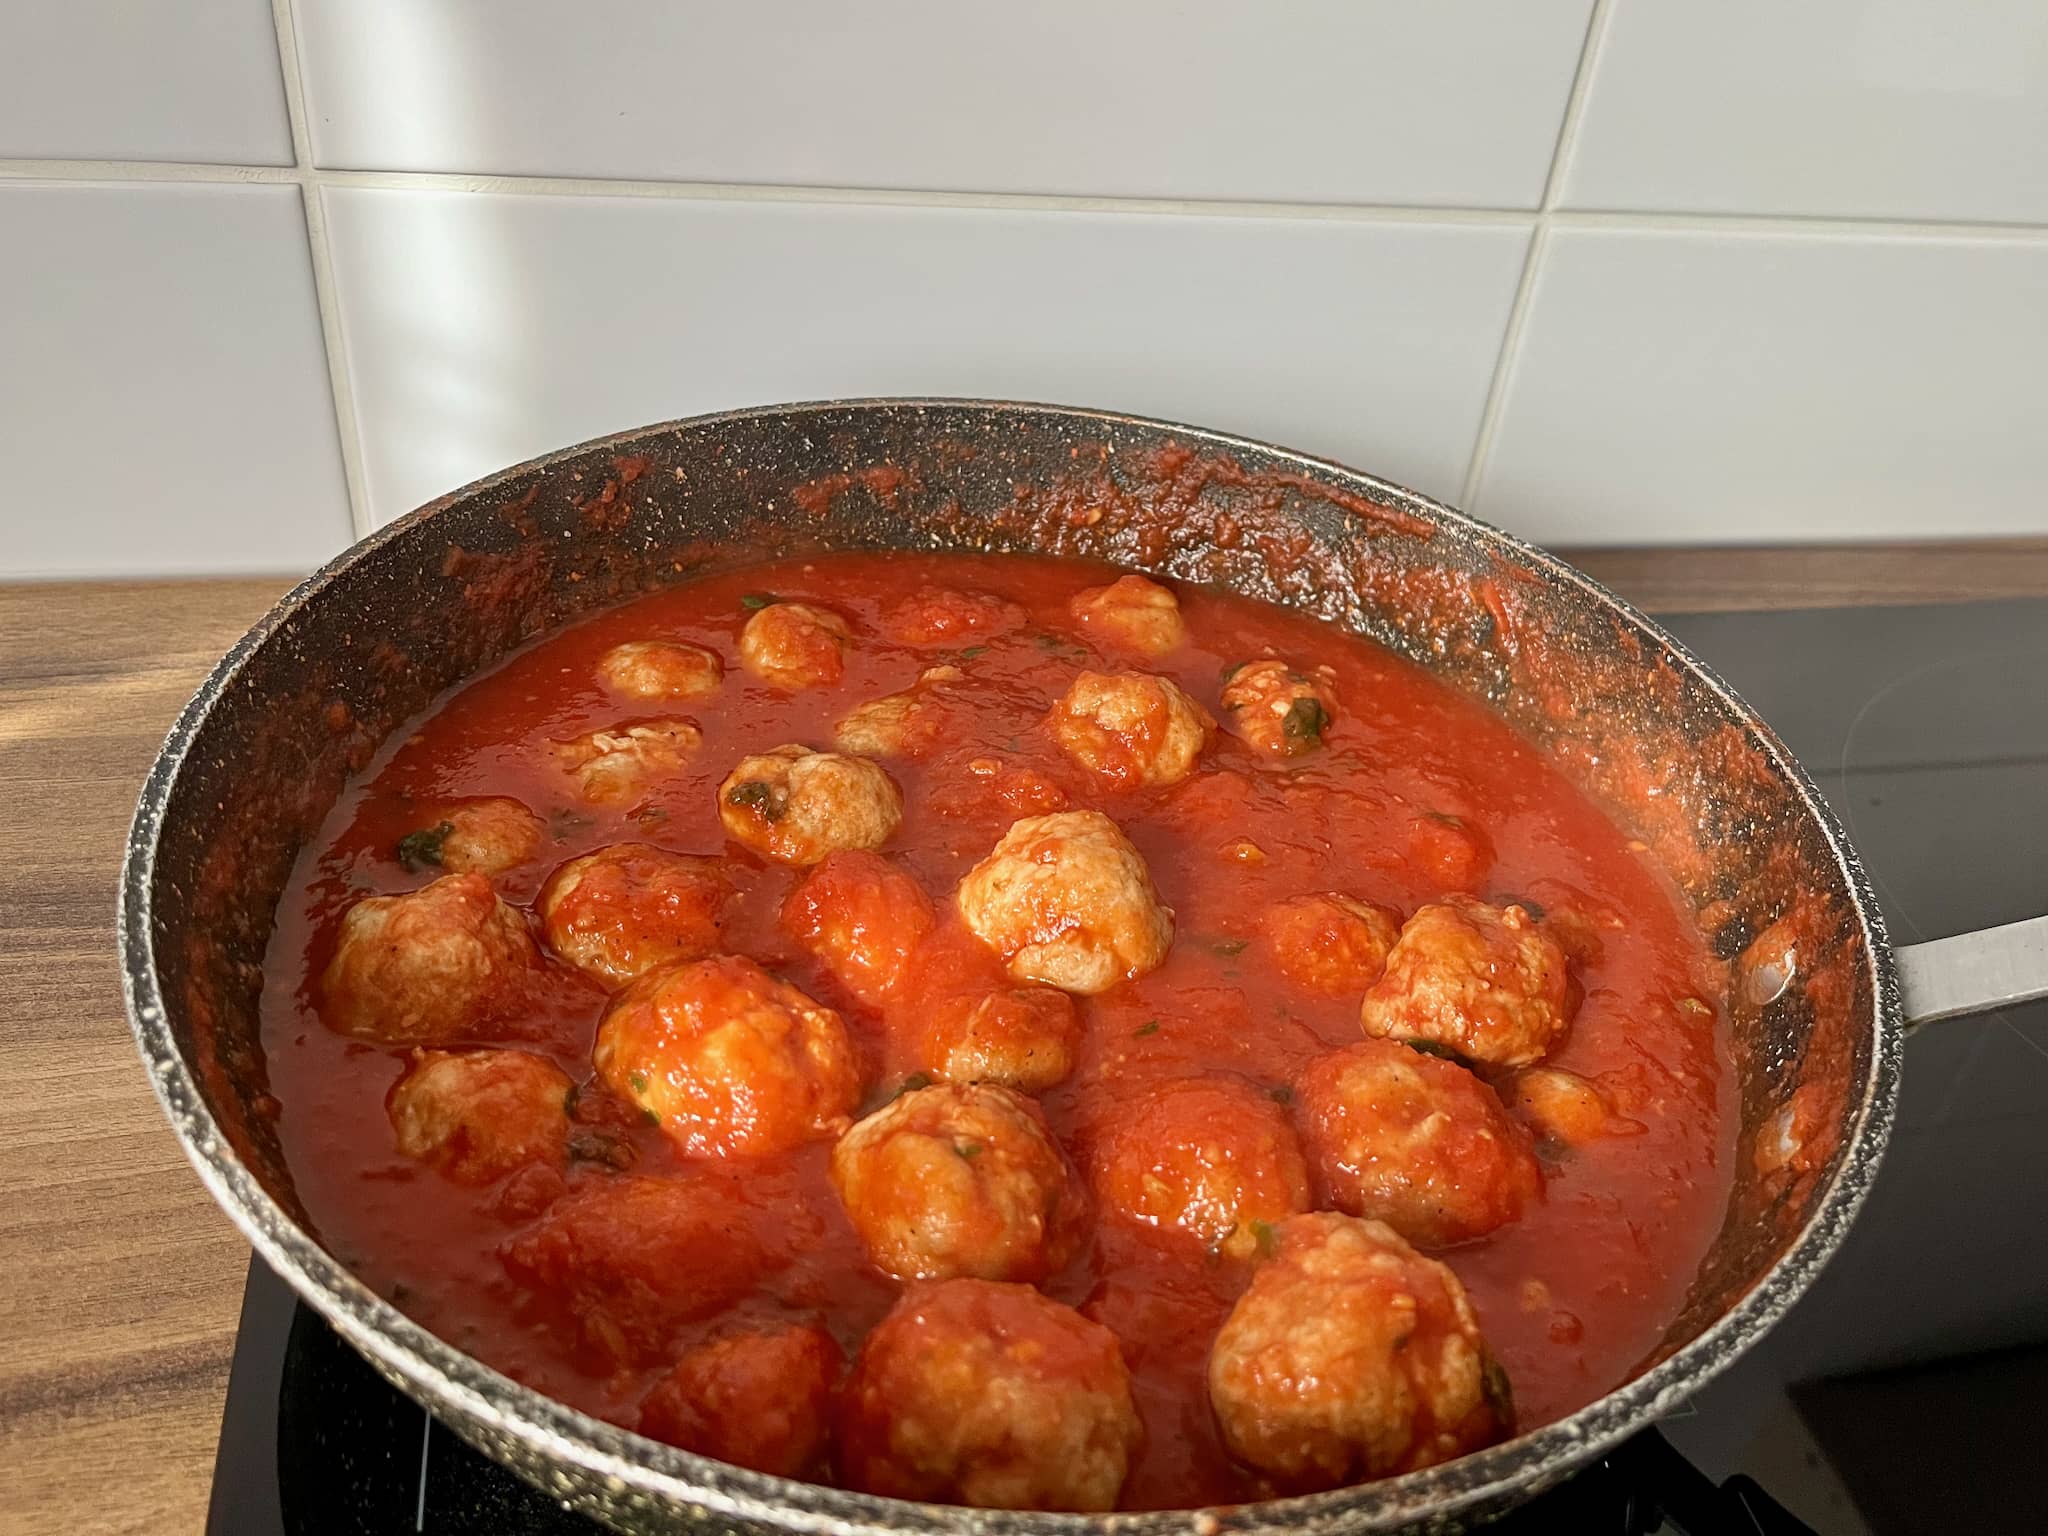 Spaghetti Meatballs - cooking in the sauce